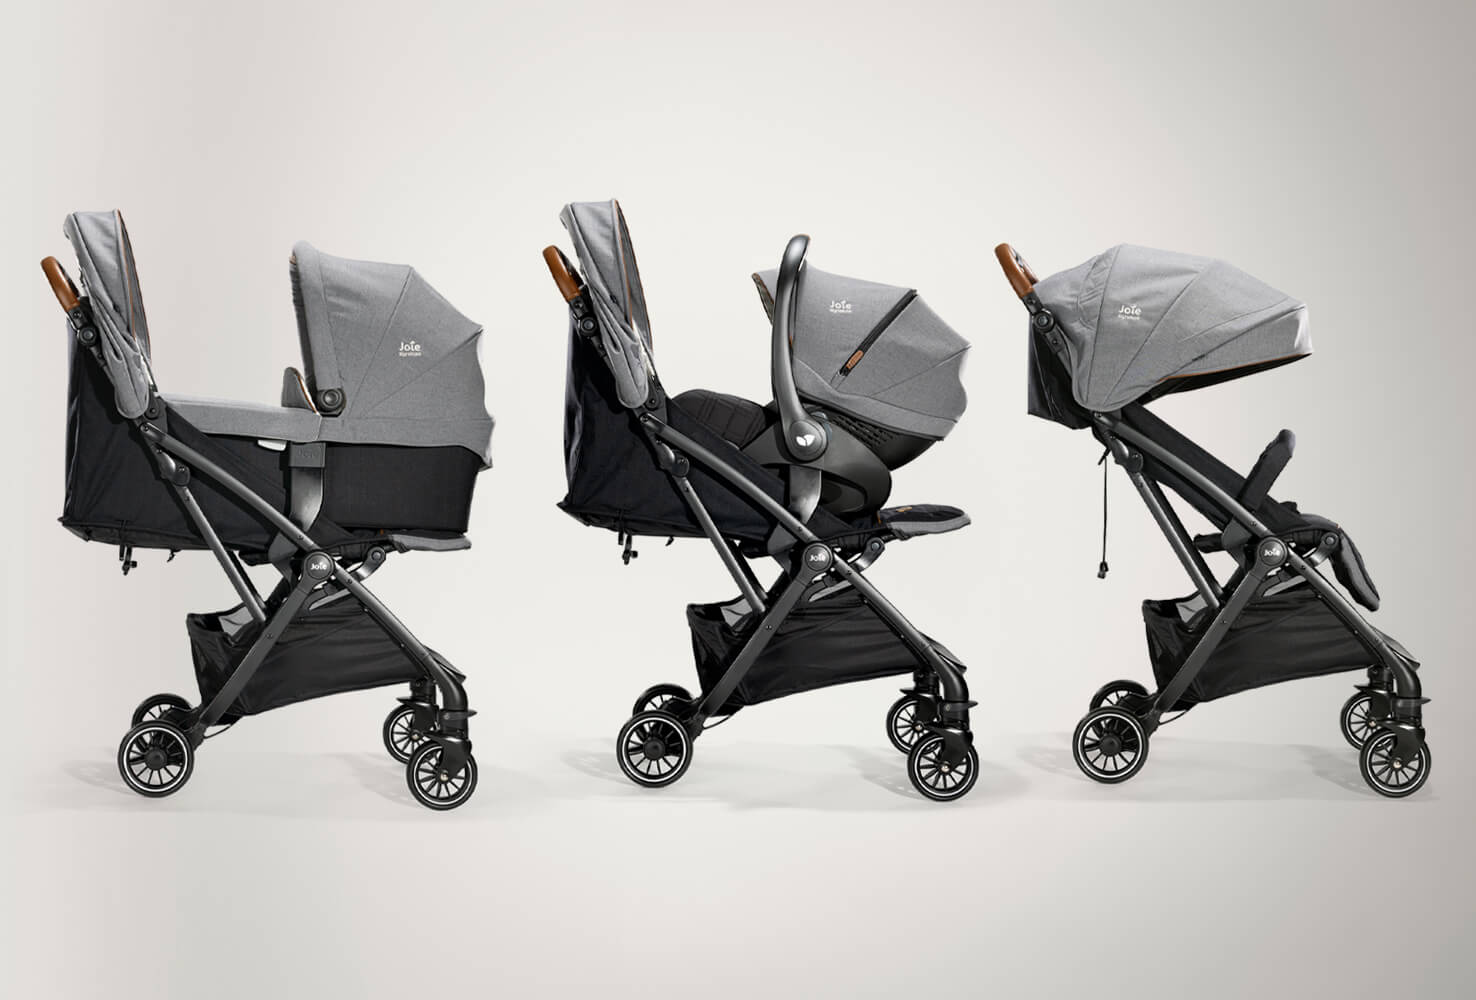 Joie tourist stroller in light gray in its three modes; carry cot, infant carrier and forward-facing seat.